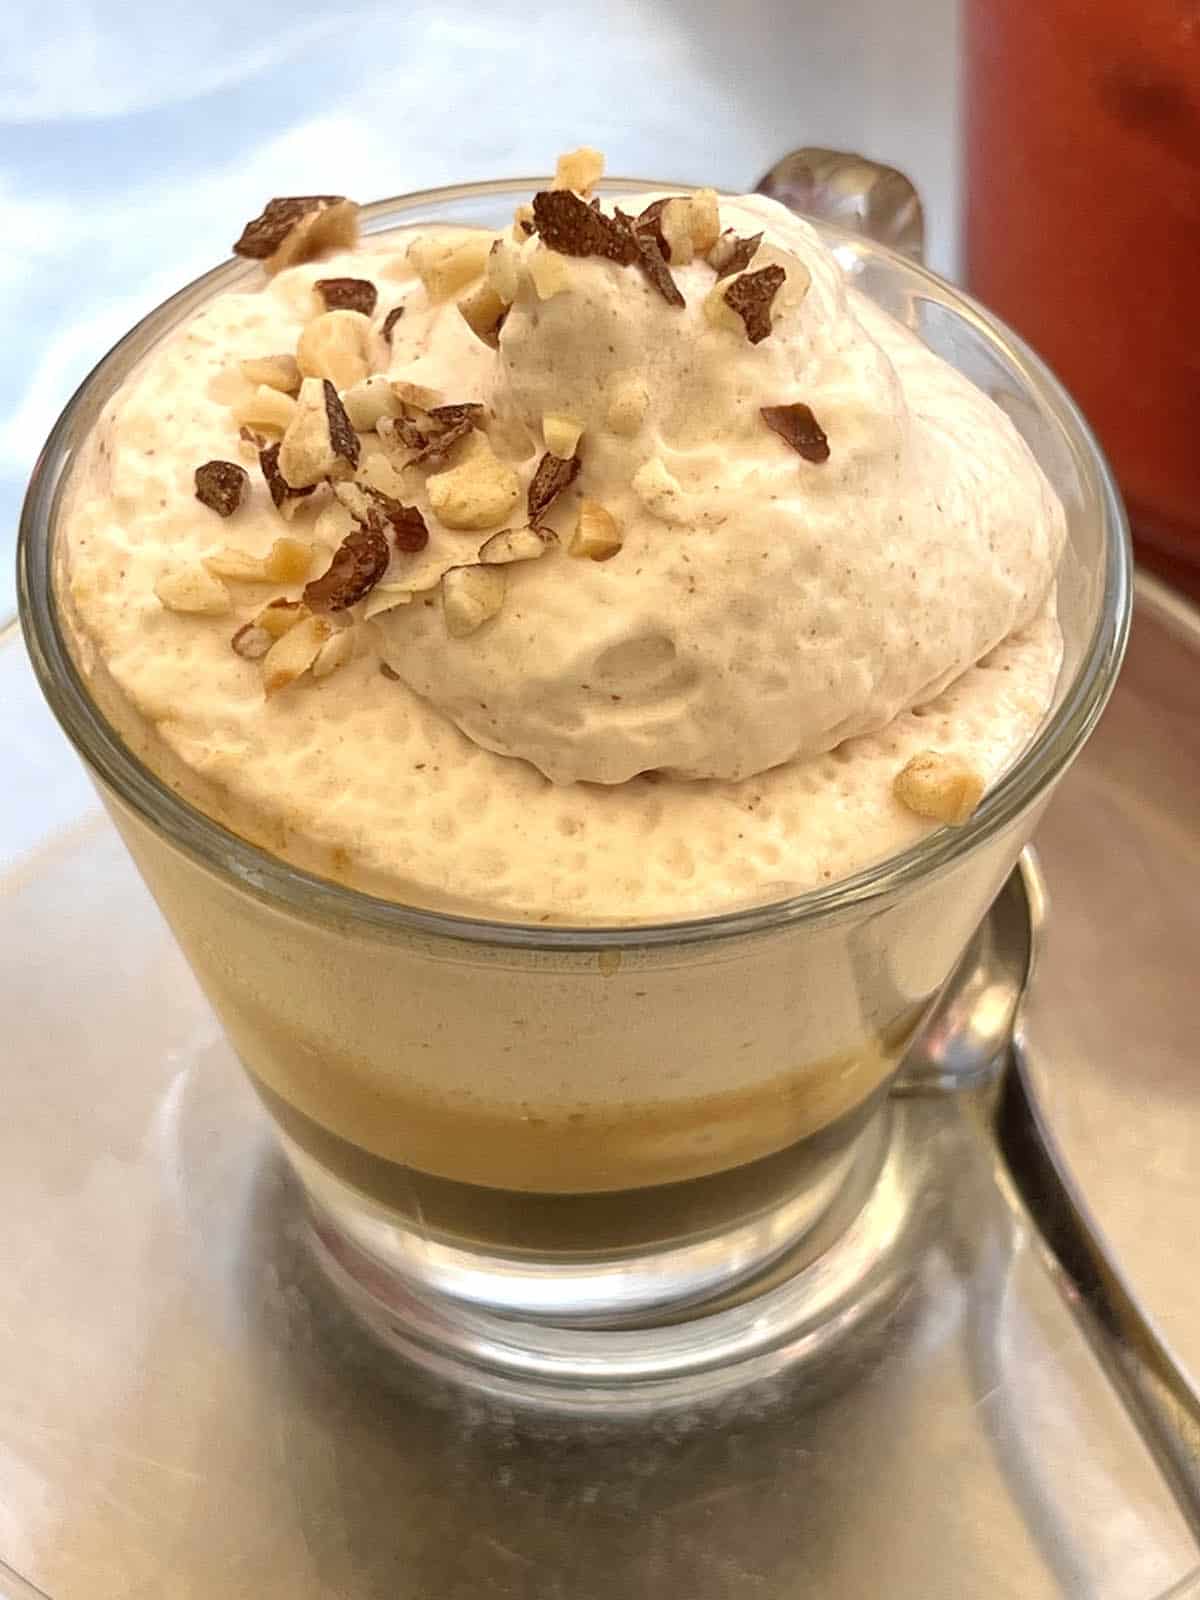 A close up image of an espresso topped with a whipped sweet almond cream from Caffè Sicilia in Noto, Sicily. 